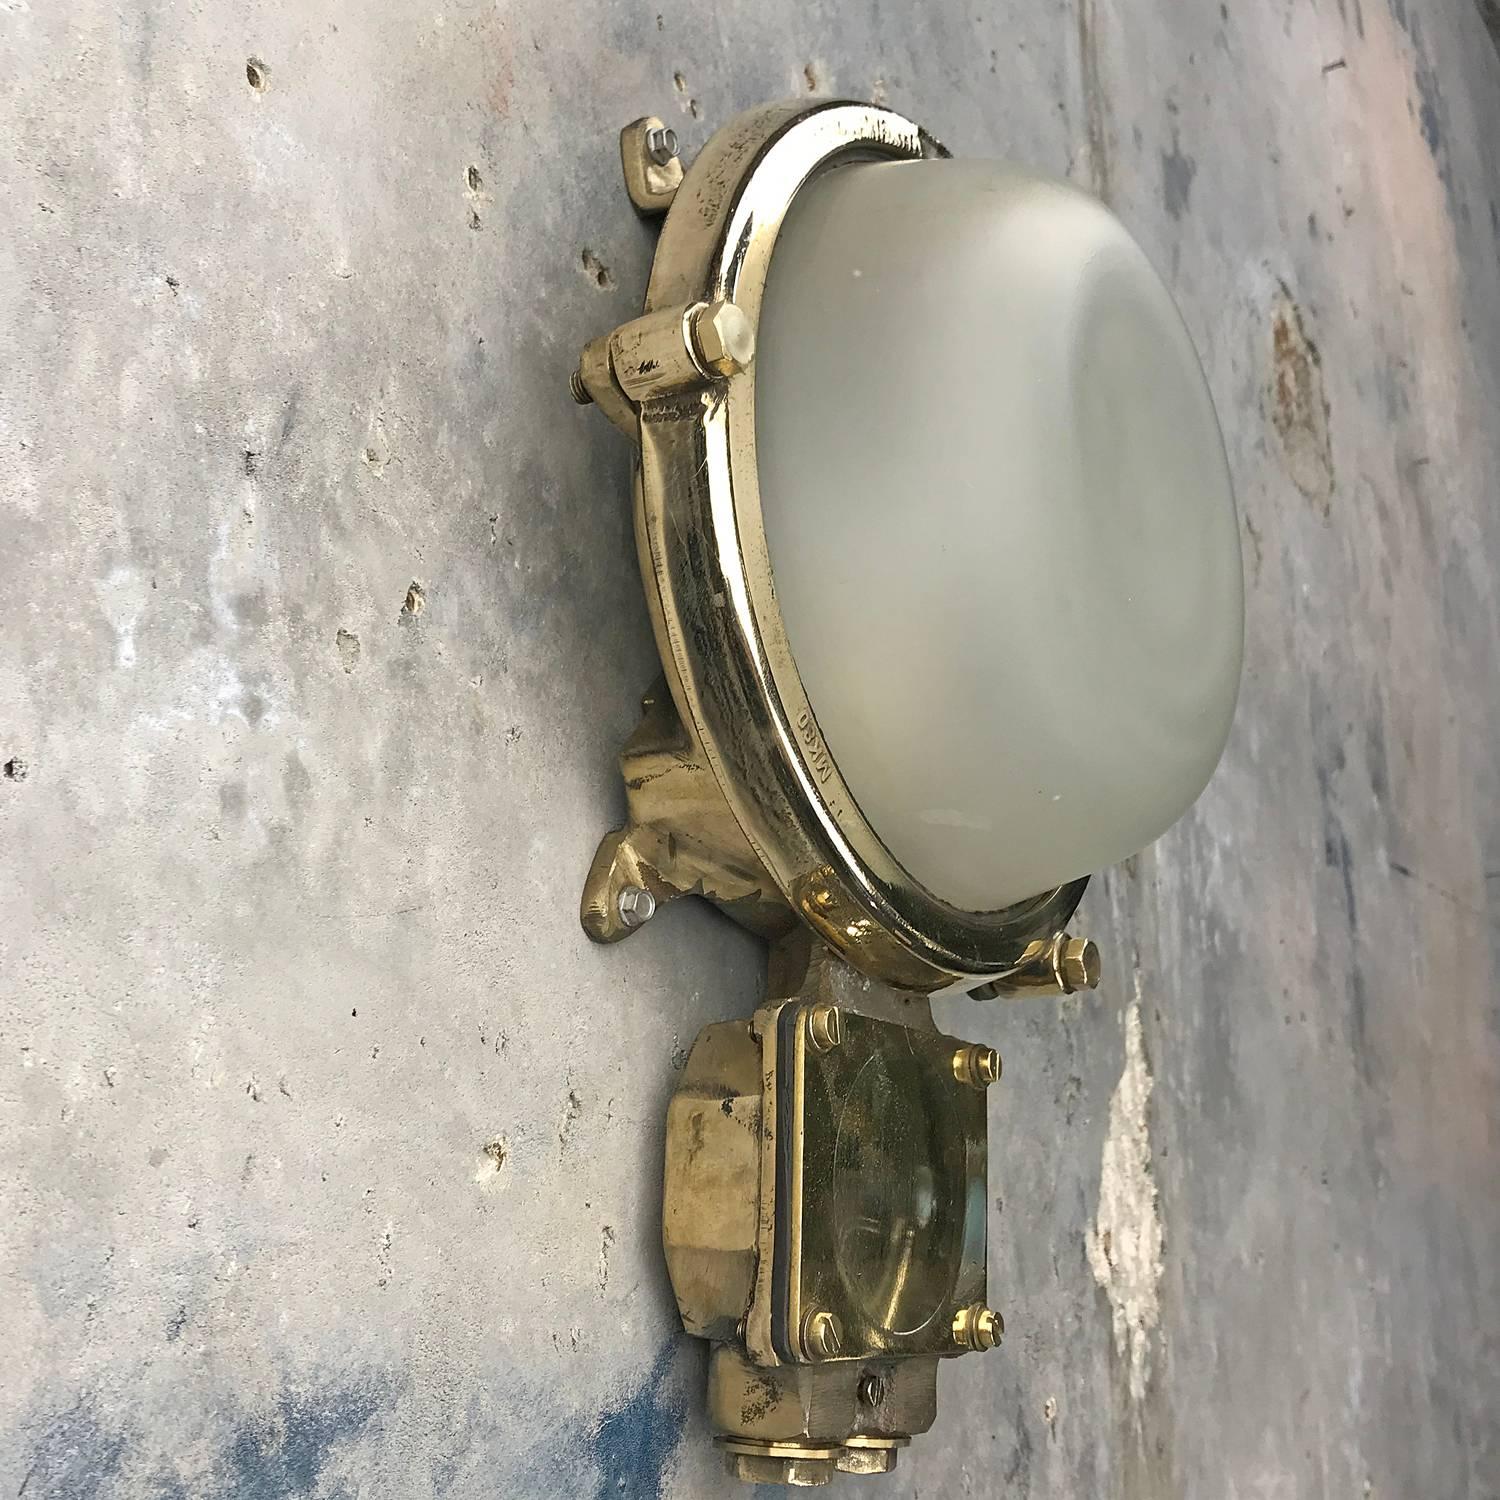 1970s German Industrial Cast Brass Circular Wall Light, Frosted Glass Shade 1